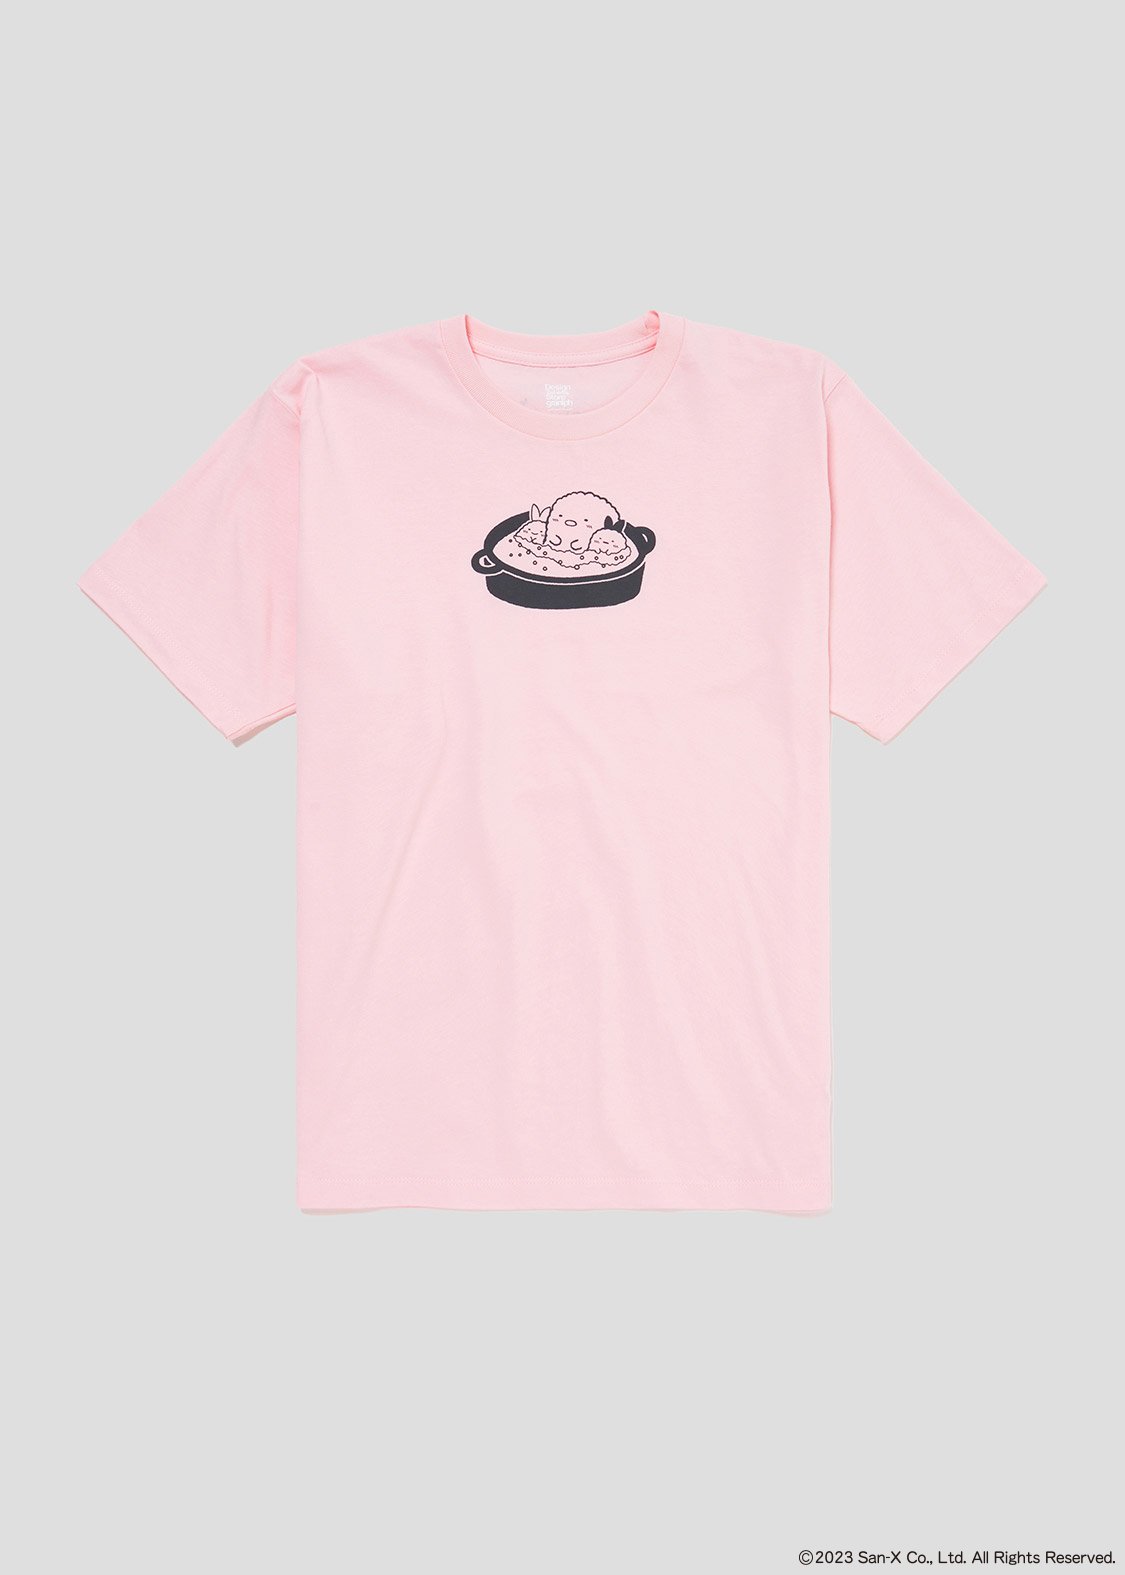 Tシャツ「アゲアゲあげっコ」Frost Pink（フロストピンク）